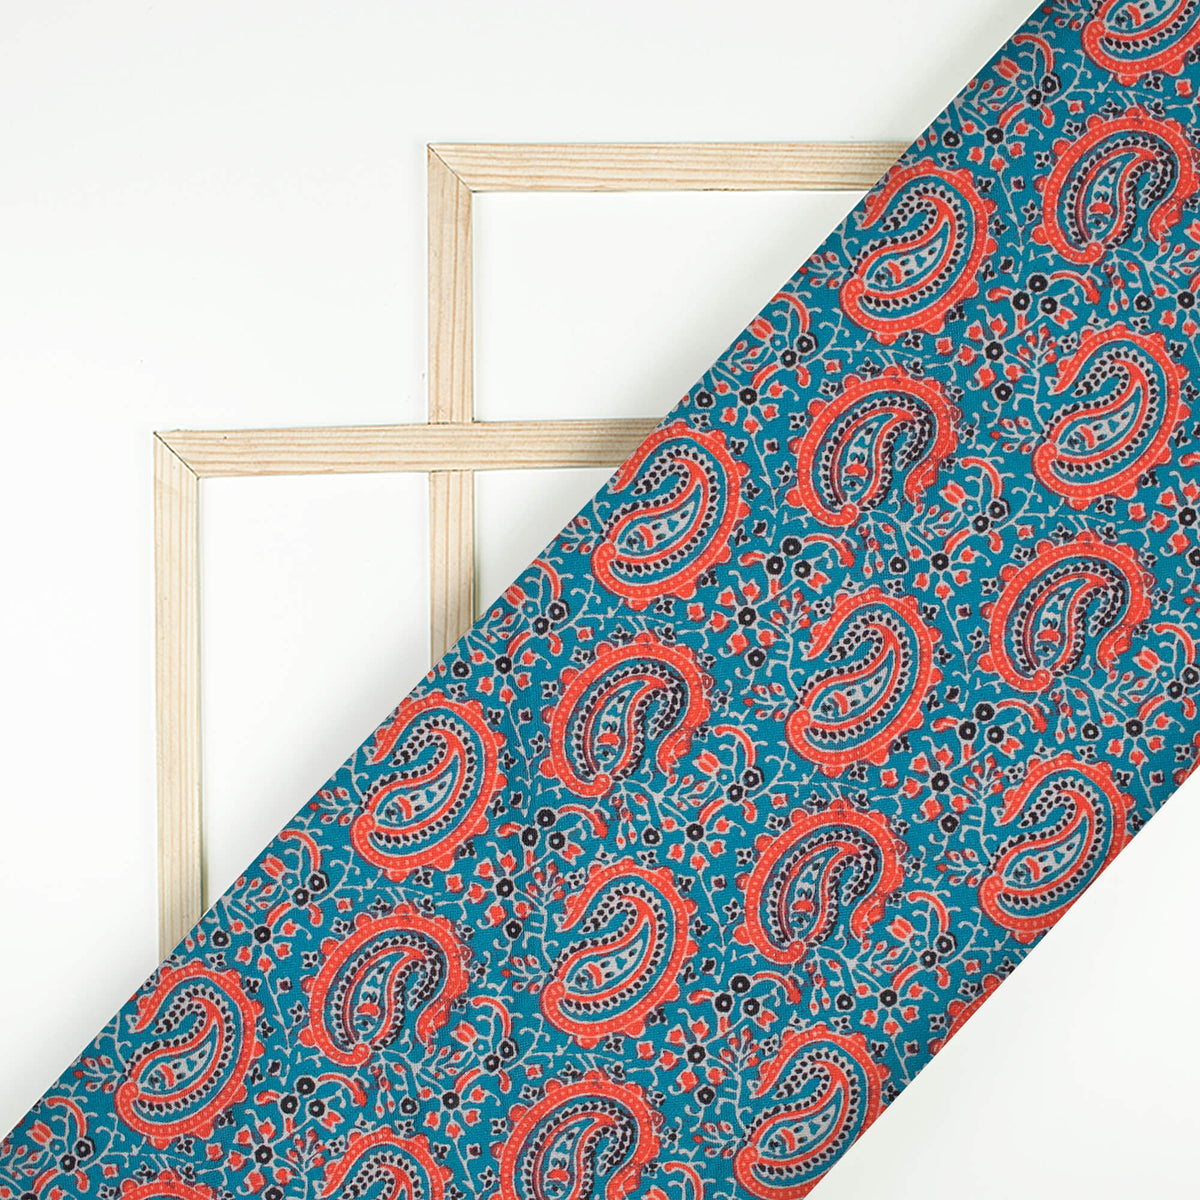 Peacock Blue And Persian Red Paisley Pattern Digital Print Linen Textured Fabric (Width 56 Inches)